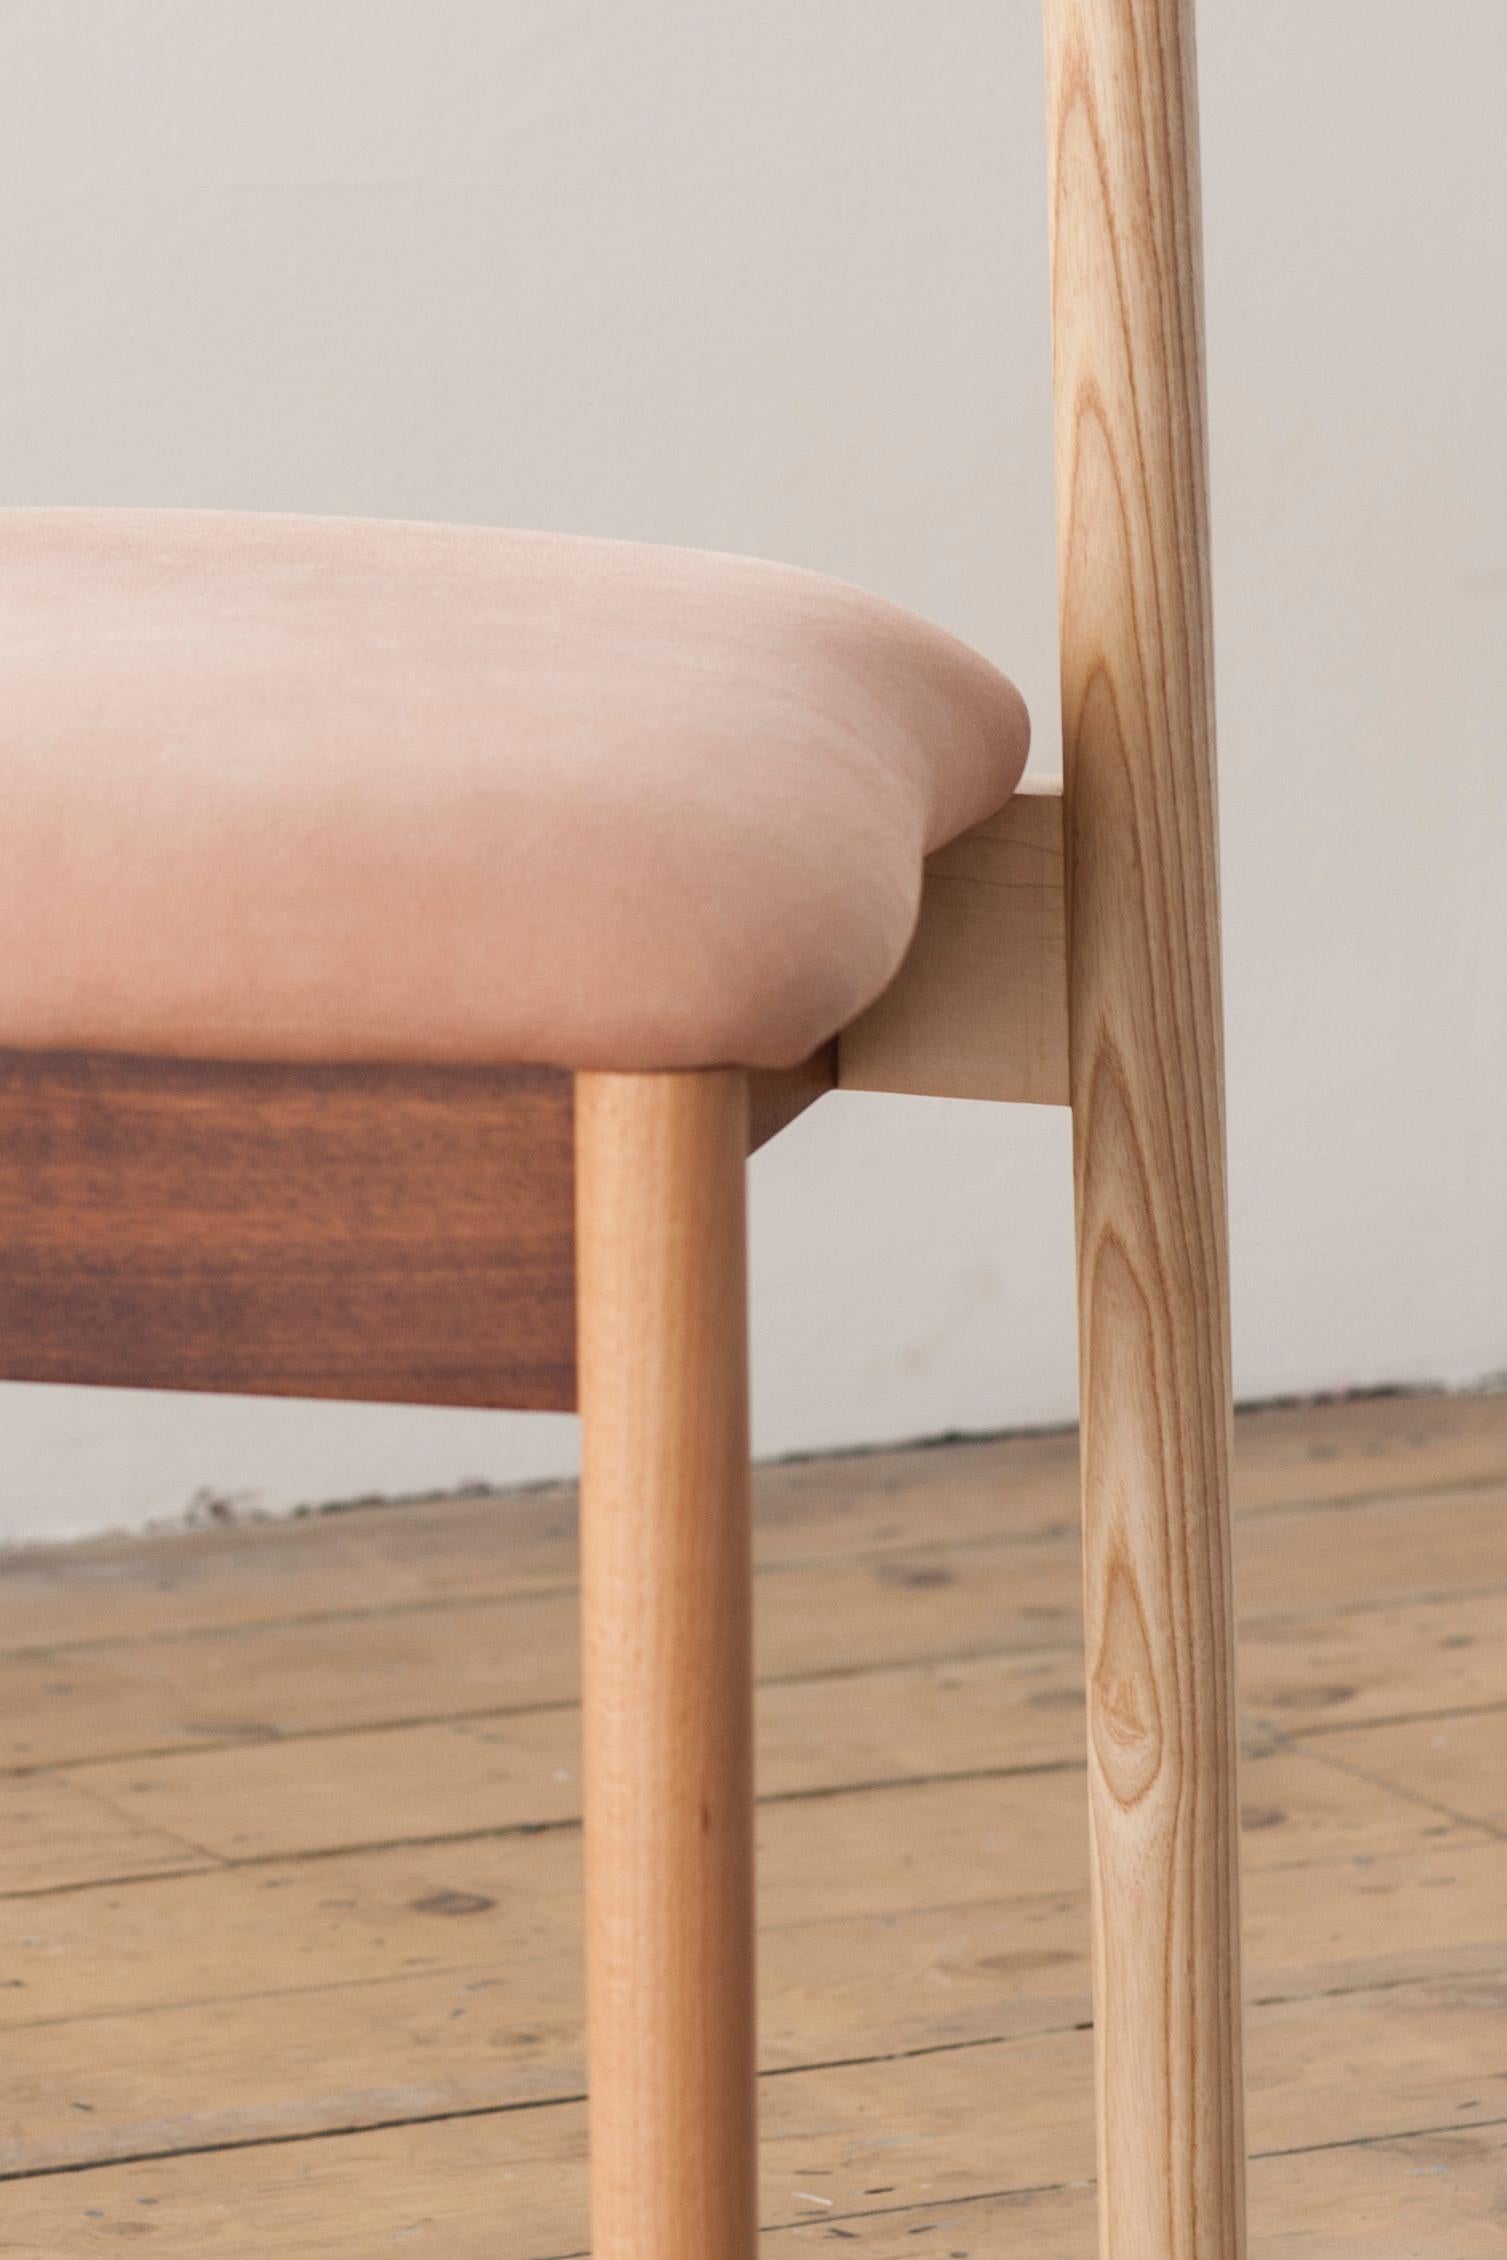 'One of a kind' dining chair, upholstered in salmon pink suede.
Handmade.

Materials: 
Ash, walnut, sycamore, beech, oak, maple, iroko, suede.

Dimensions: 
43 cm x 146 cm x 77 cm 
17’’ x 18’’ x 30’’.